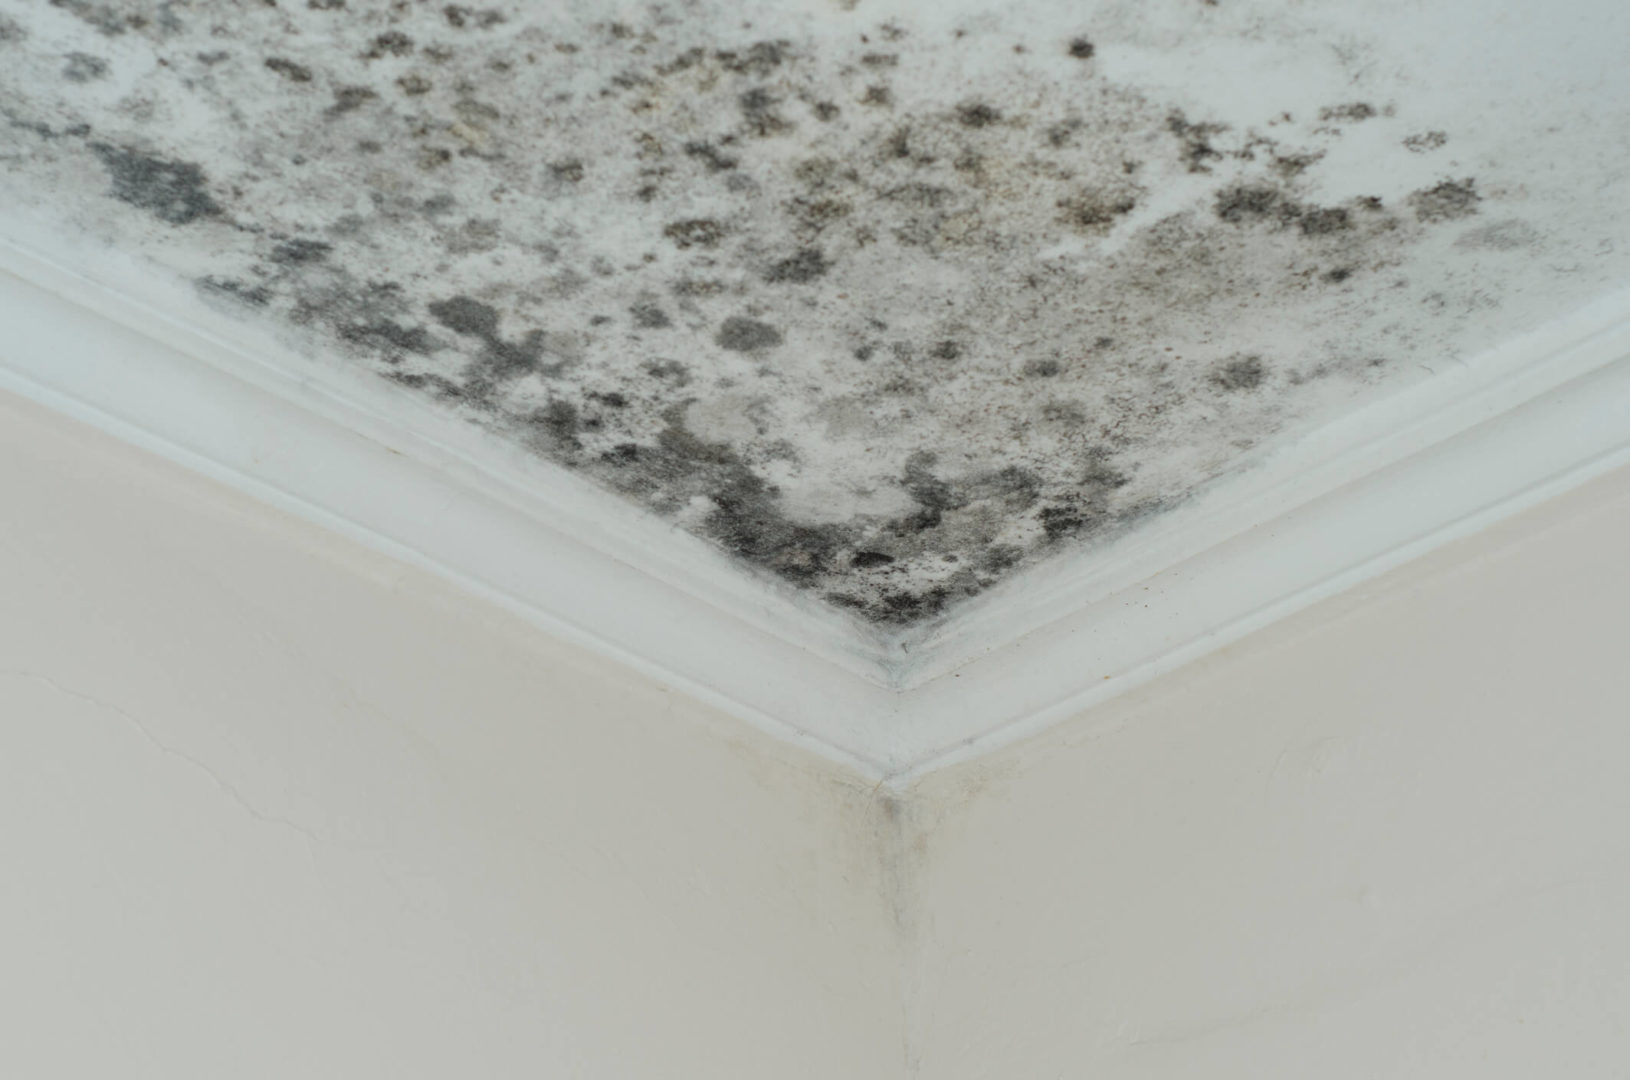 Mold remediation in Los Angeles